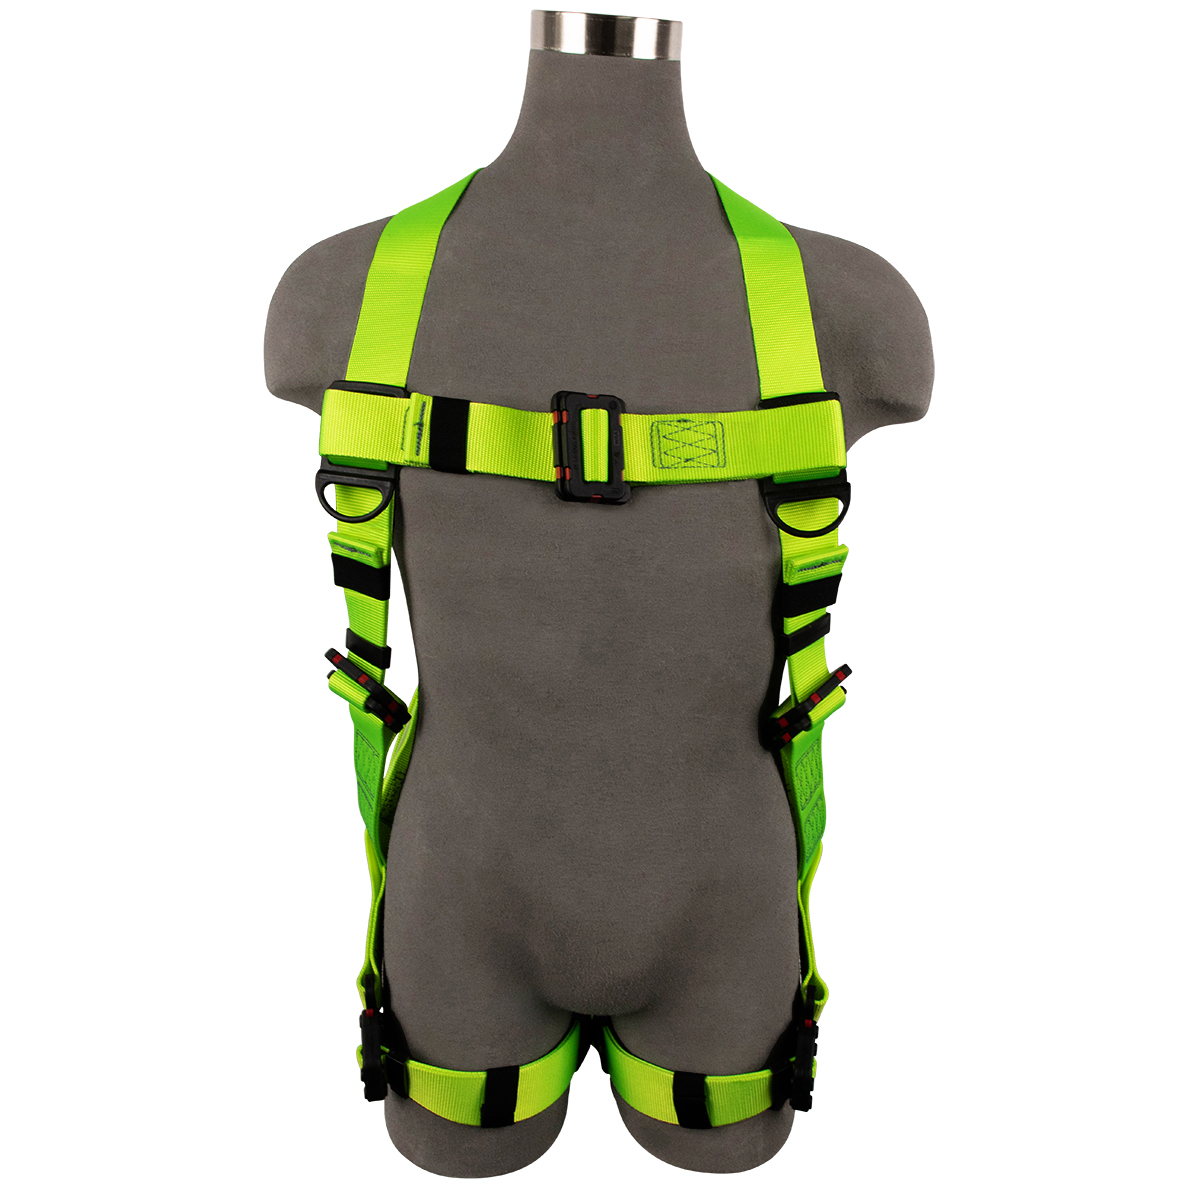 SAFEWAZE PRO+ Arc Flash Dielectric Harness with Pass through Dielectric on Chest and Quick-Connect Legs with Soft Loop Back D-Ring: L/XL